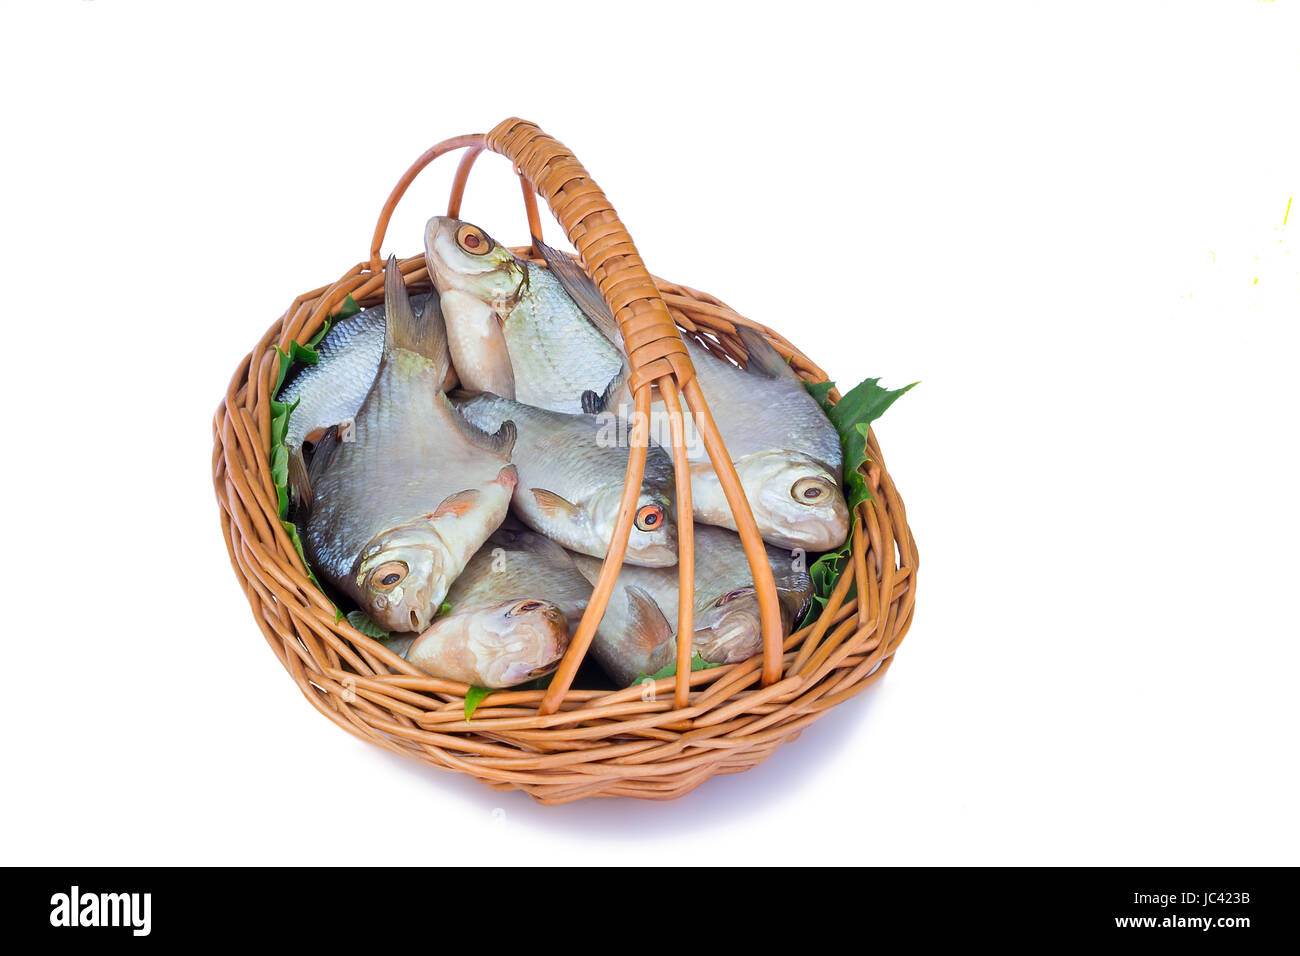 In a small wattled basket there is fish hooked in the river. It is presented on a white background. Stock Photo